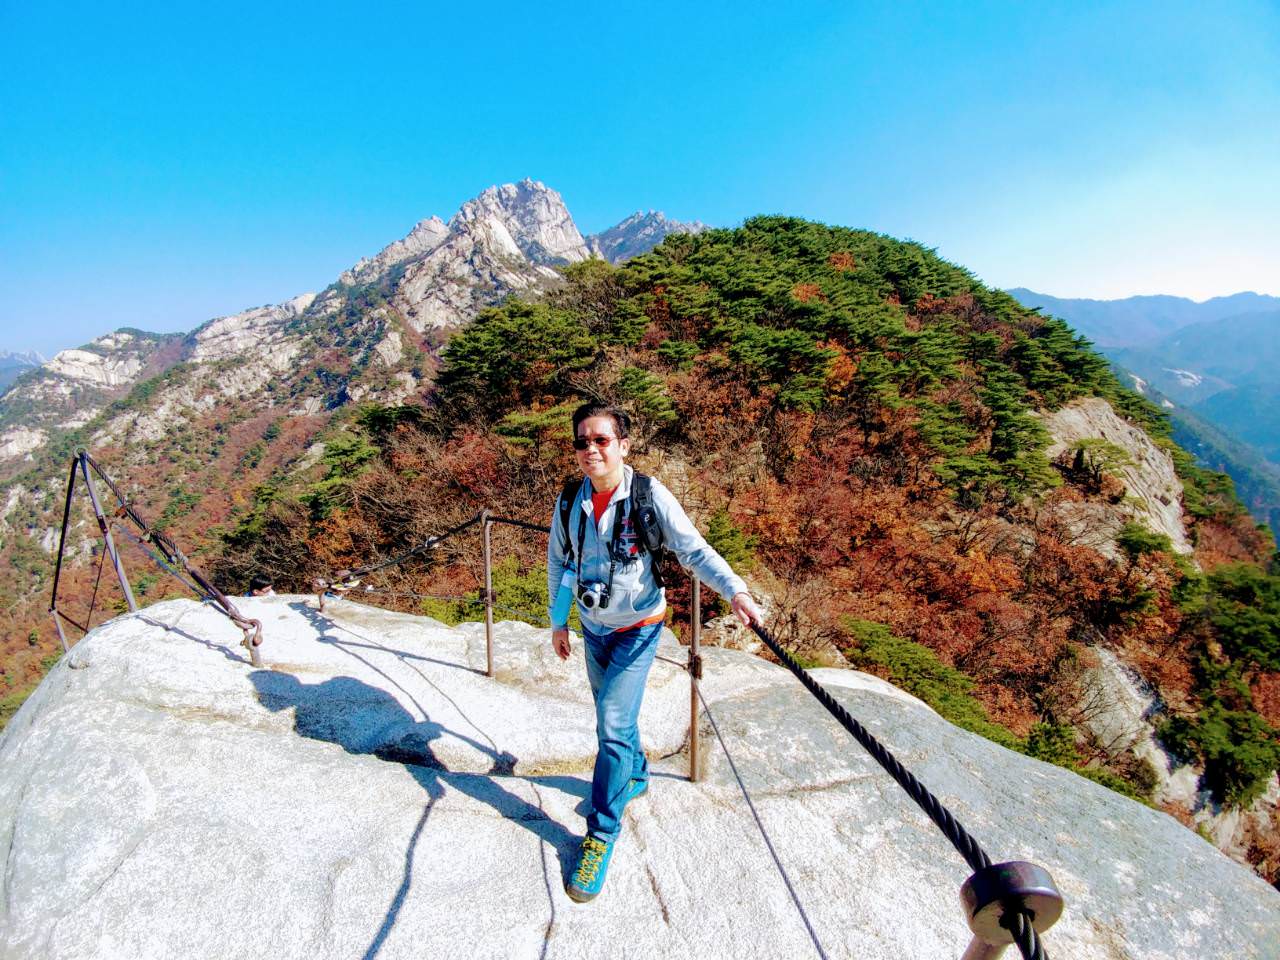 10 Exciting Things to Do in Bukhansan Mountain National Park. Enjoy hiking, rock climbing, nature-watching, temple visiting, camping, cycling, horse-riding, etc.